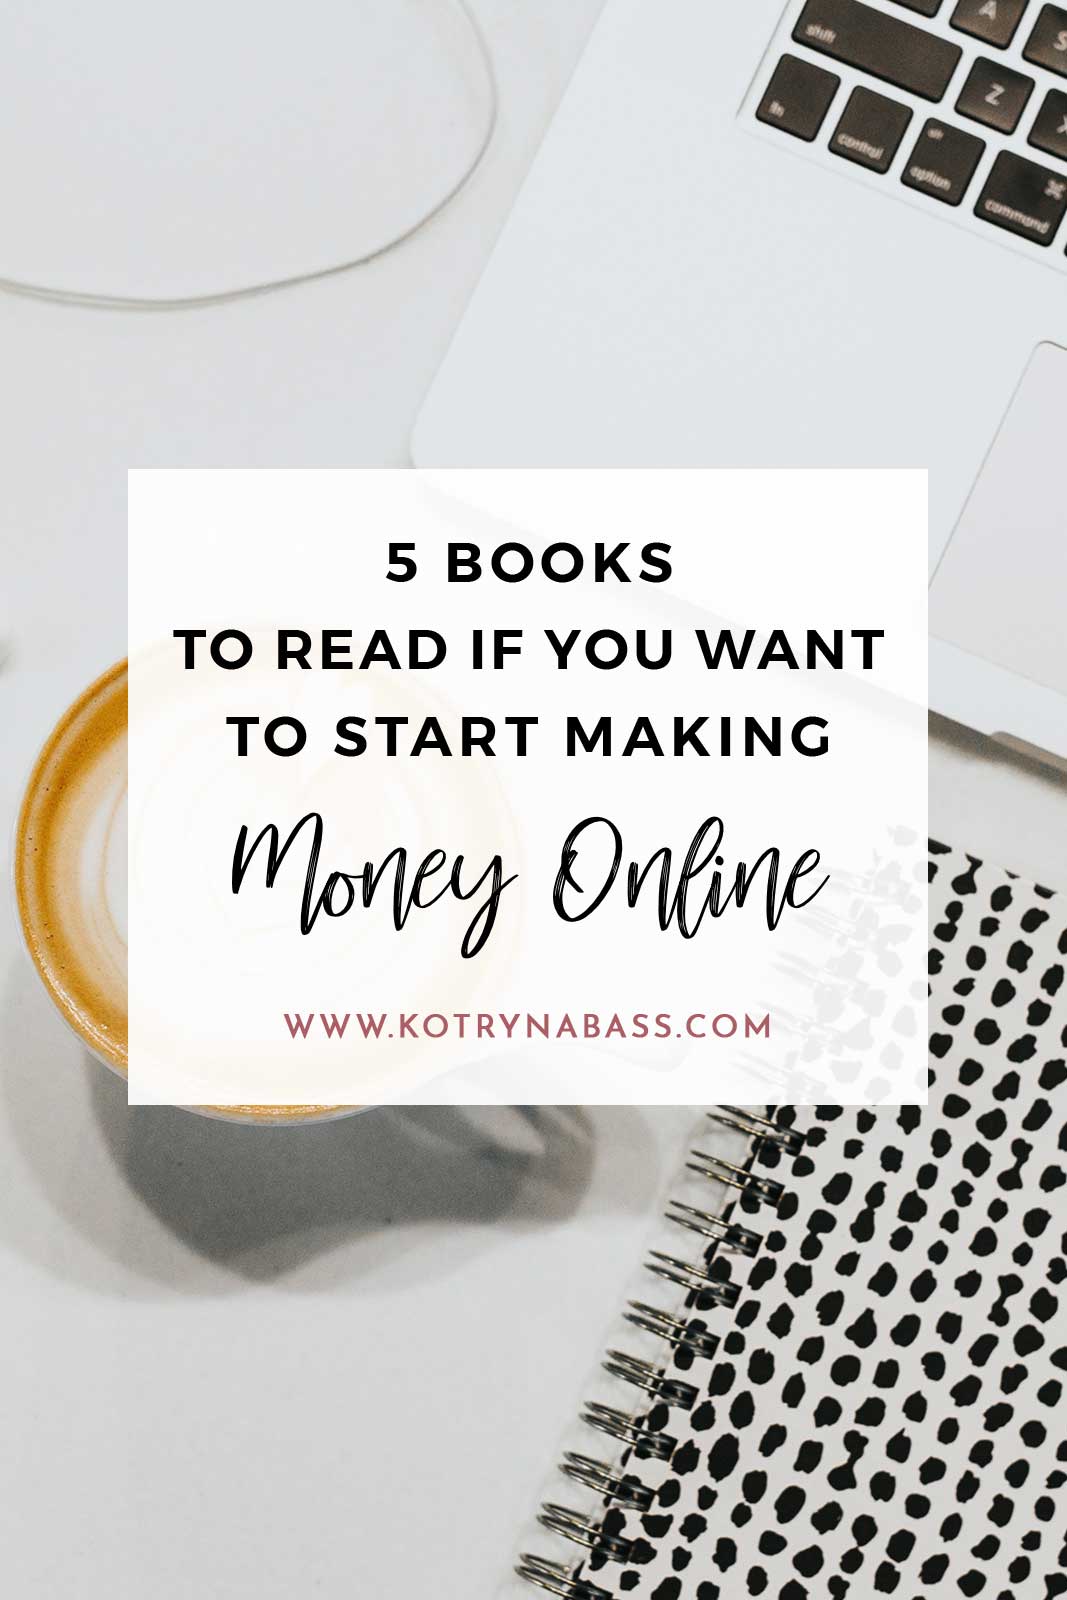 I promised myself to share more reads with you all in 2018 and here I am- making it happen! I'm obsessed with self-improvement books. I'm not saying that they share any easy recipe for building a successful career online, but they definitely give you a great understanding of what works for others. In the end, it all depends on YOU, but if you're looking to get inspired and learn a thing or two from the real professionals, this list is for you!